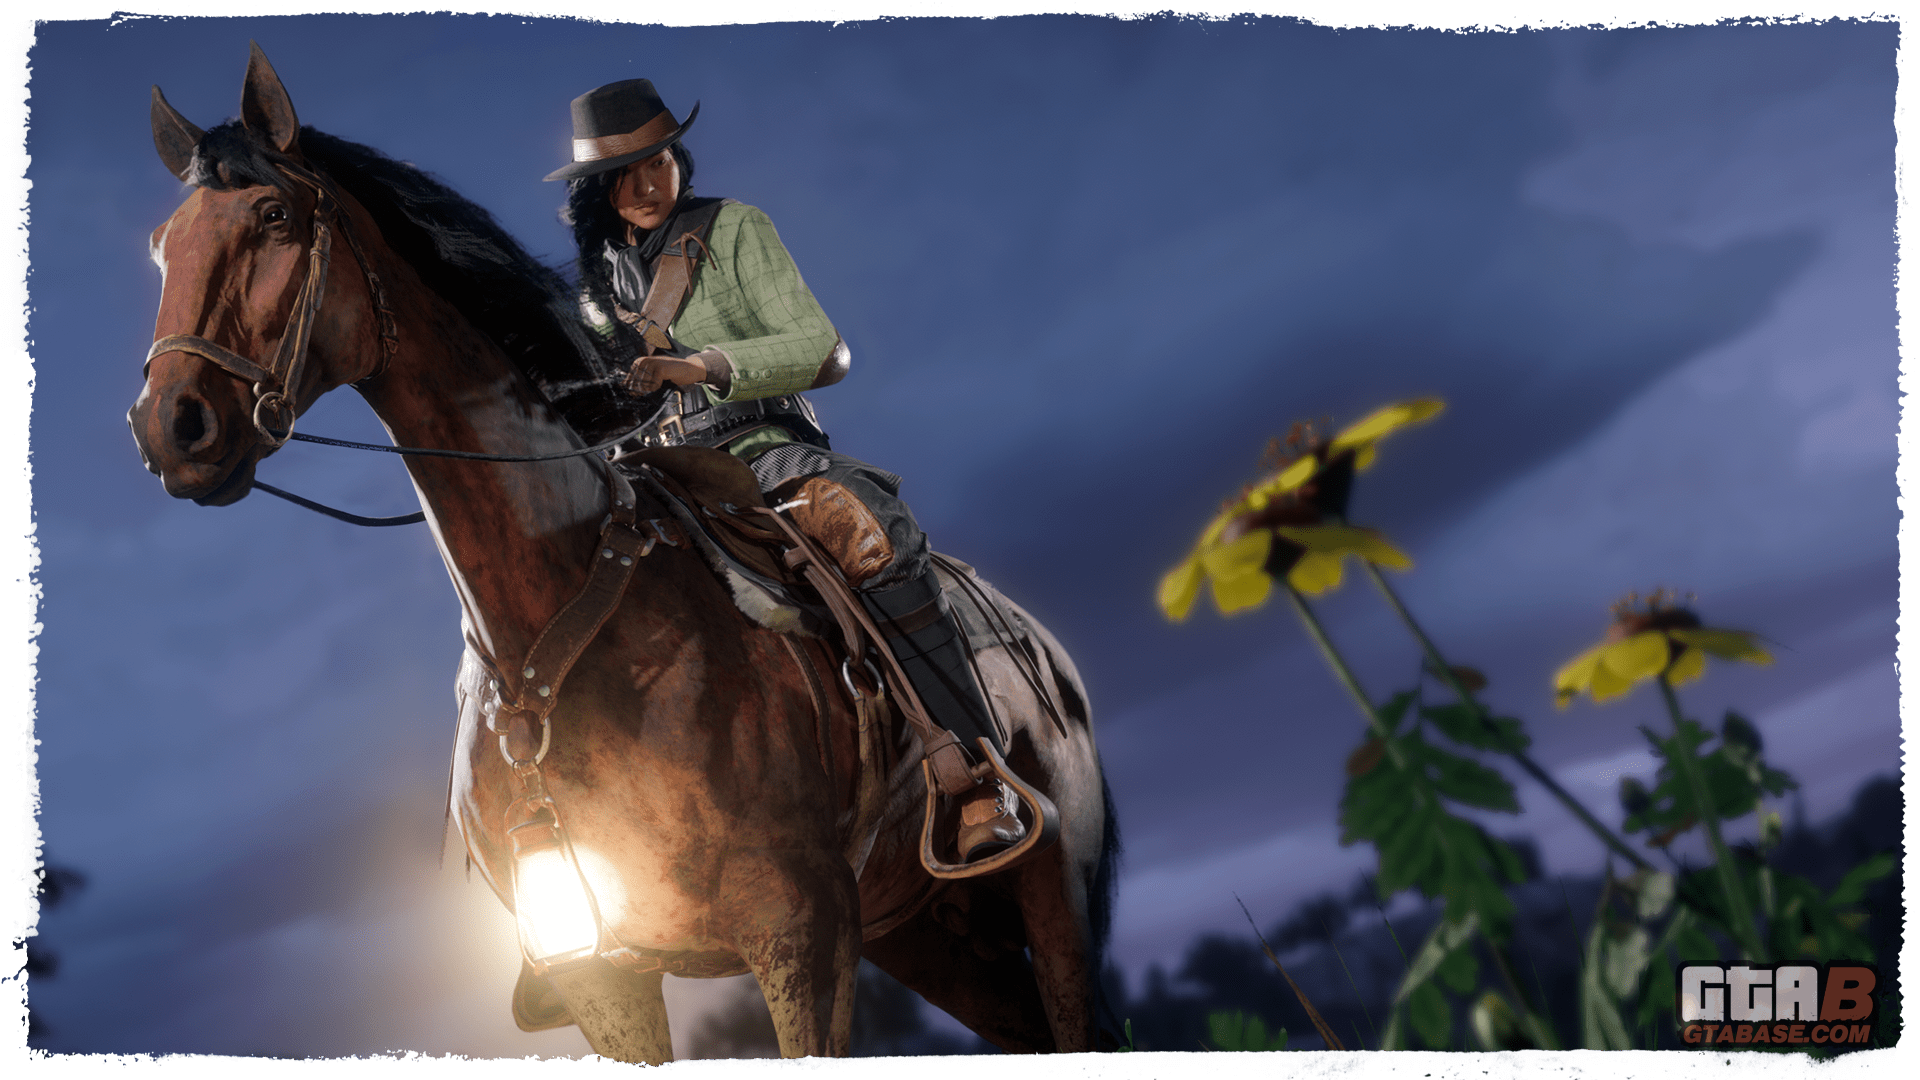 download free call to arms rdo